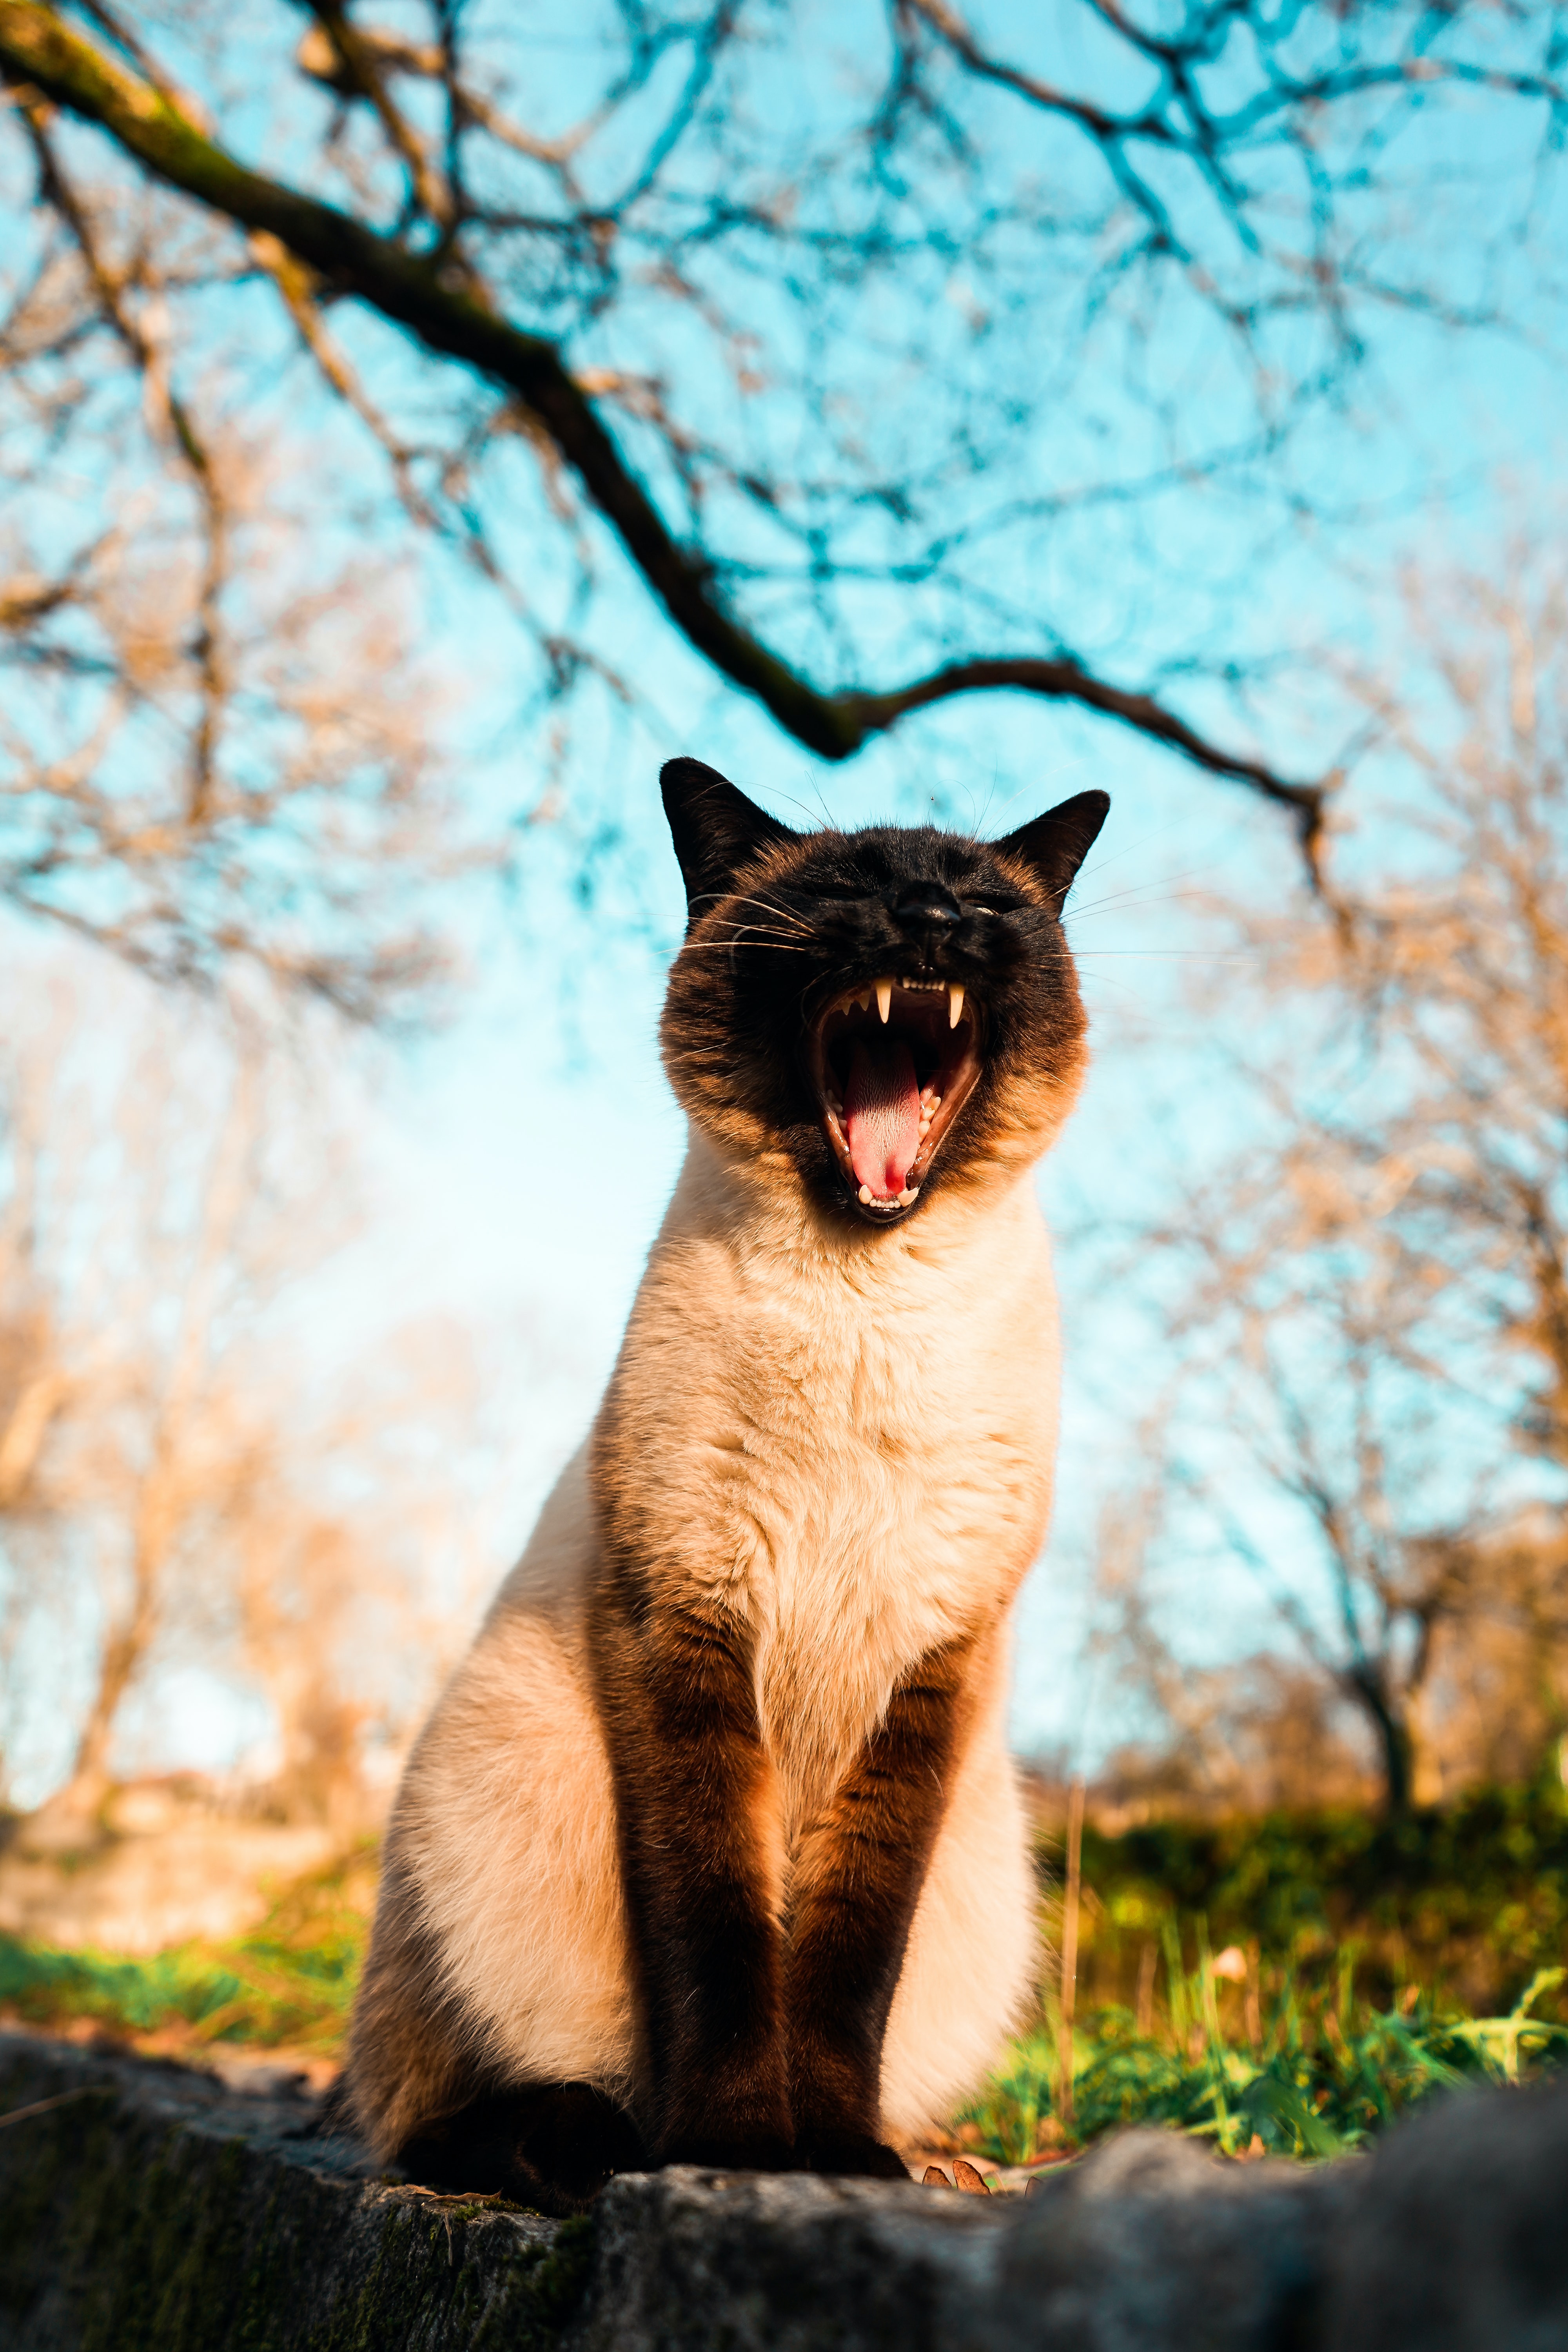 animals, grass, cat, branches, pet, yawn